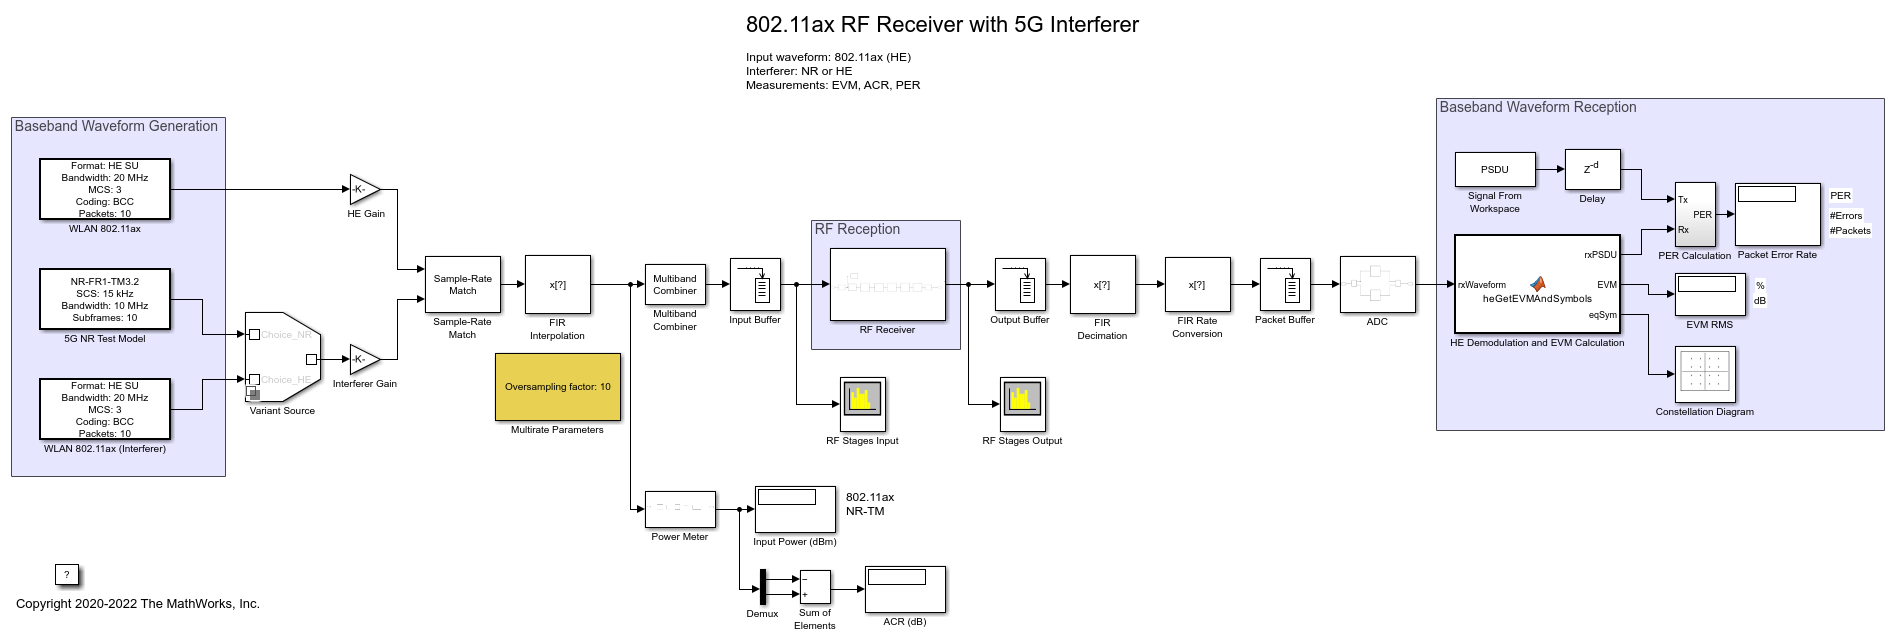 Modeling and Testing an 802.11ax RF Receiver with 5G Interference